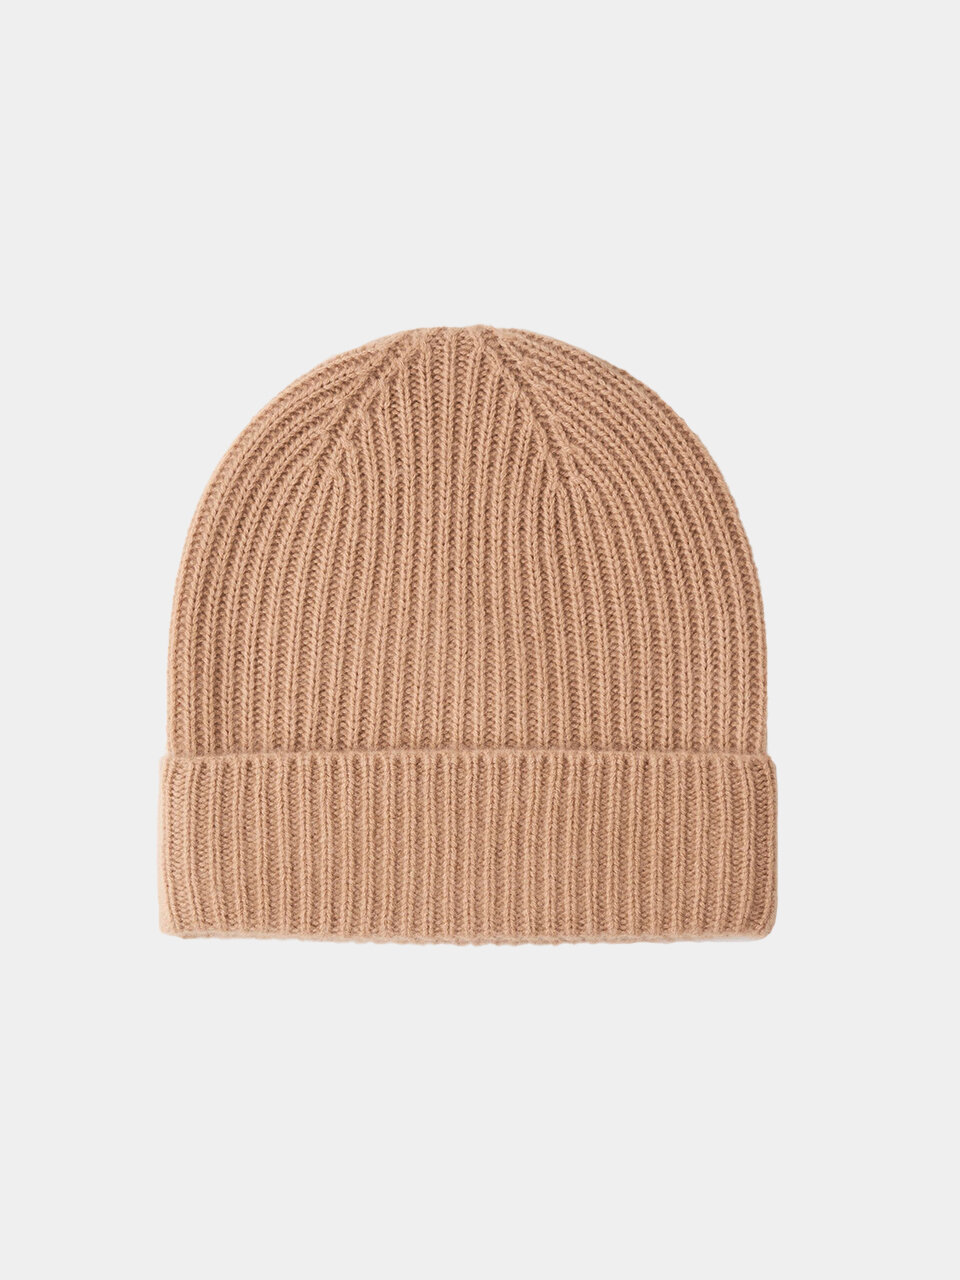 Repeat Cashmere - Ribbed Cashmere Beanie